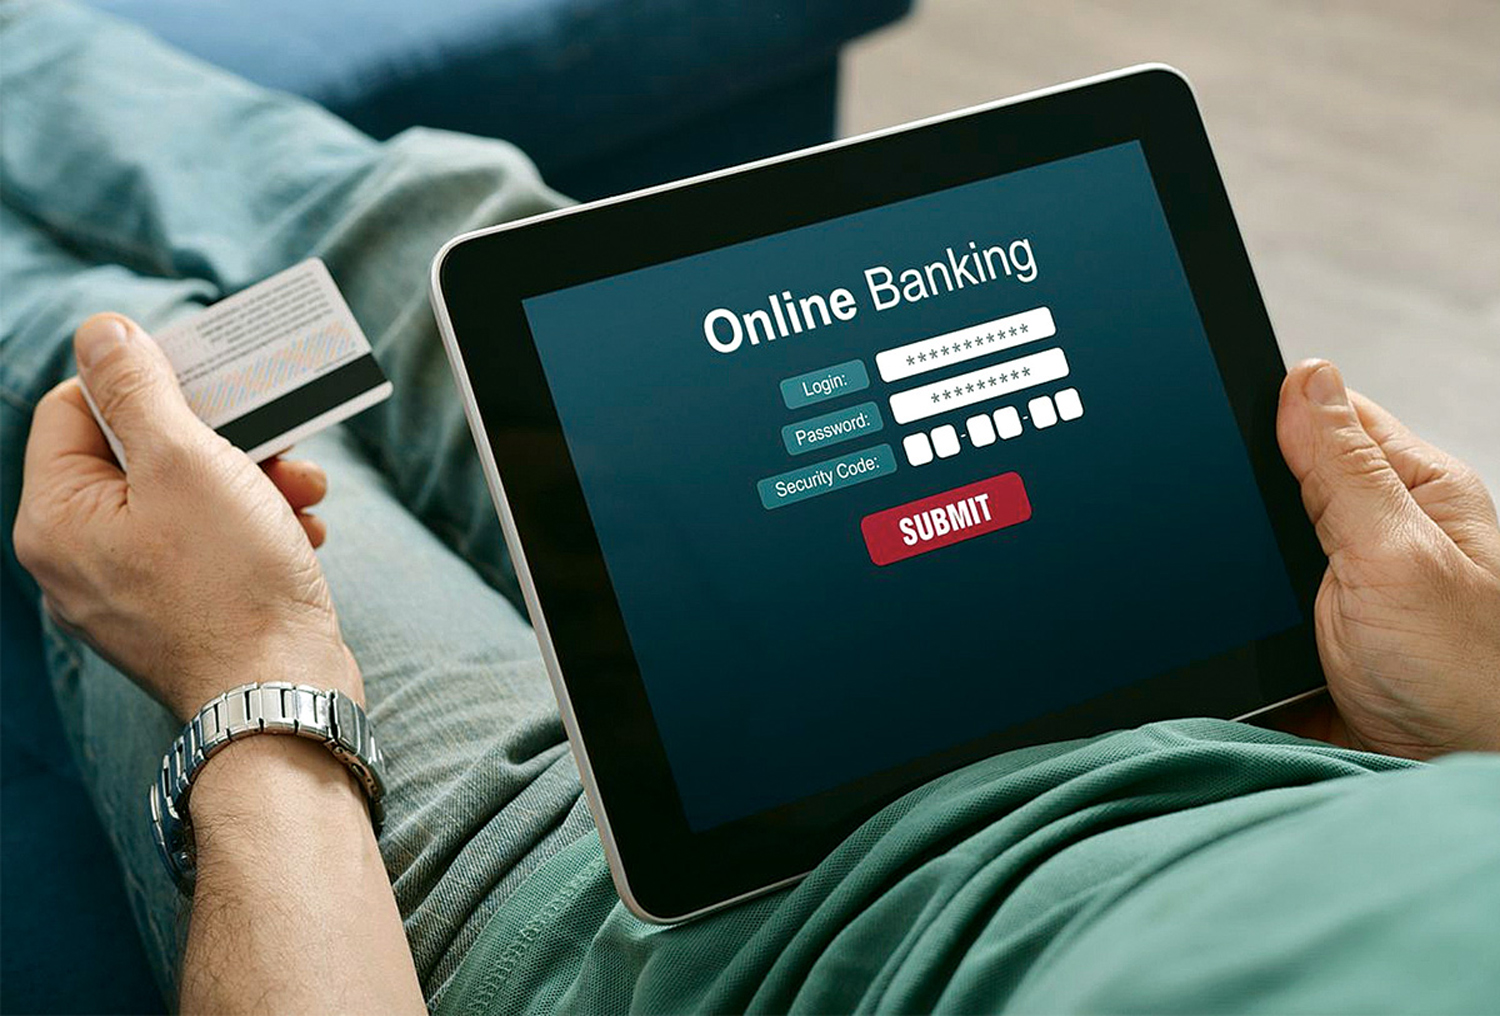 Image is of Internet Banking